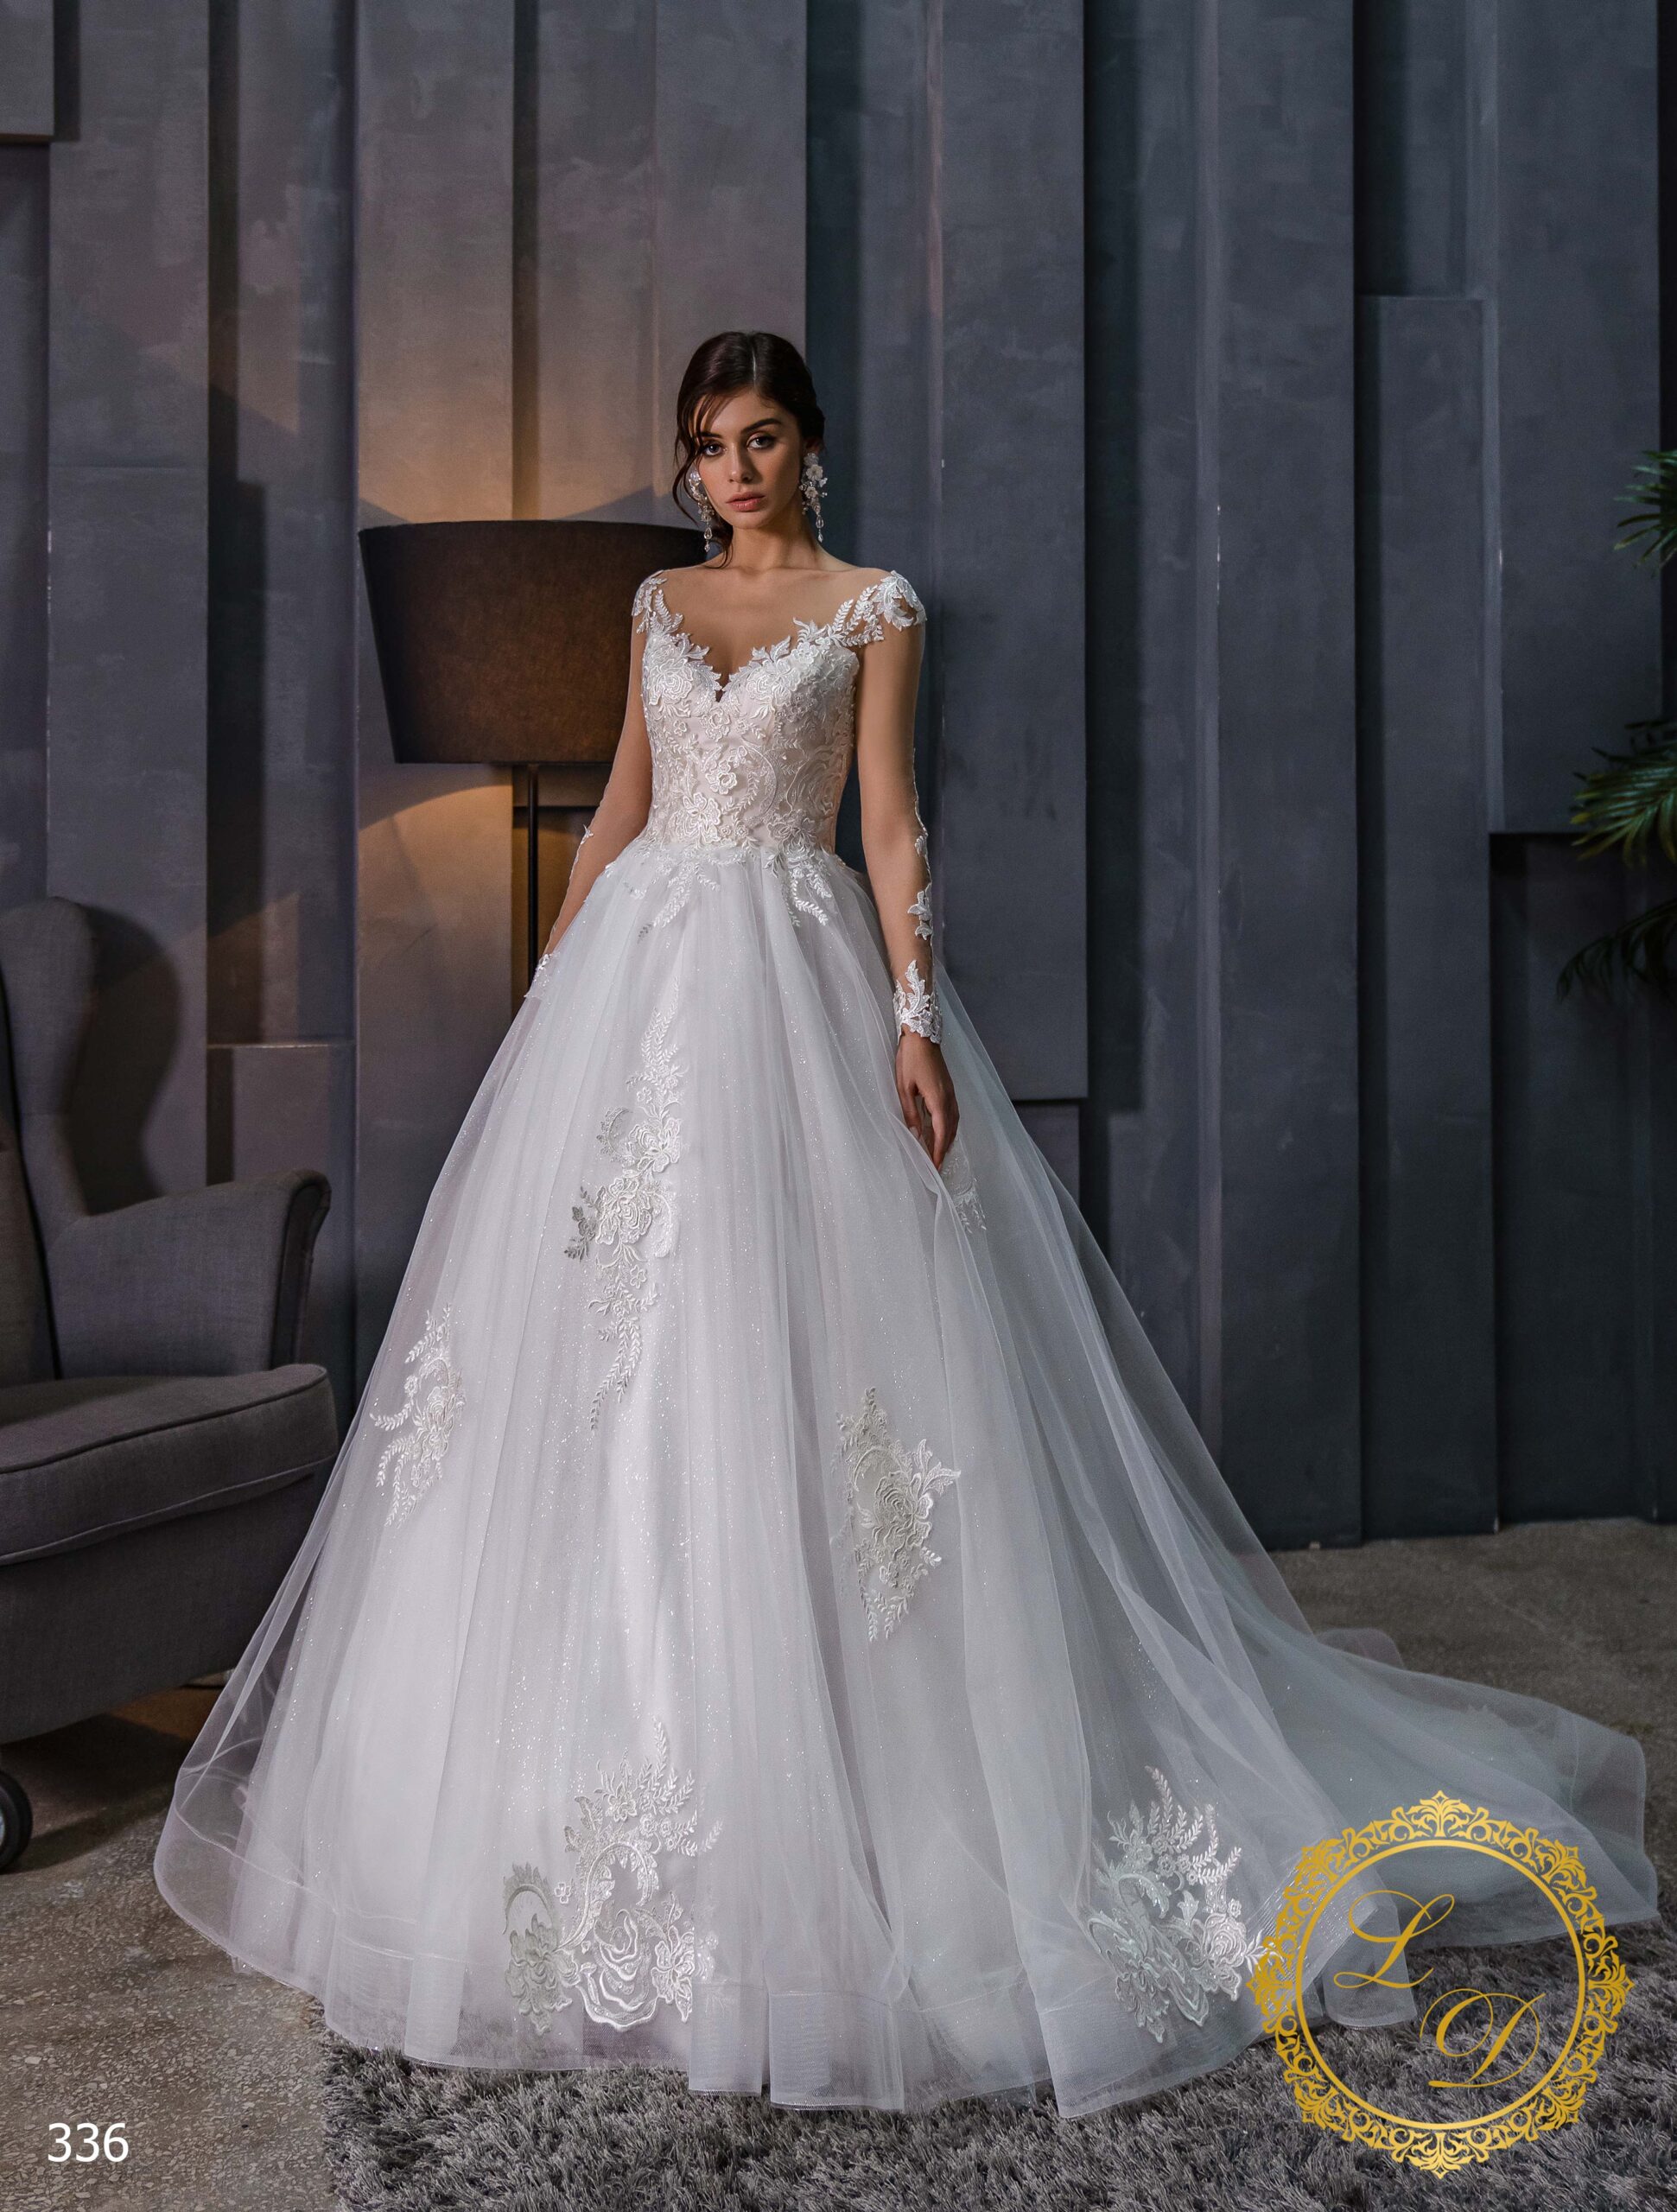 Product image for Wedding dress Lady Di Bride 336